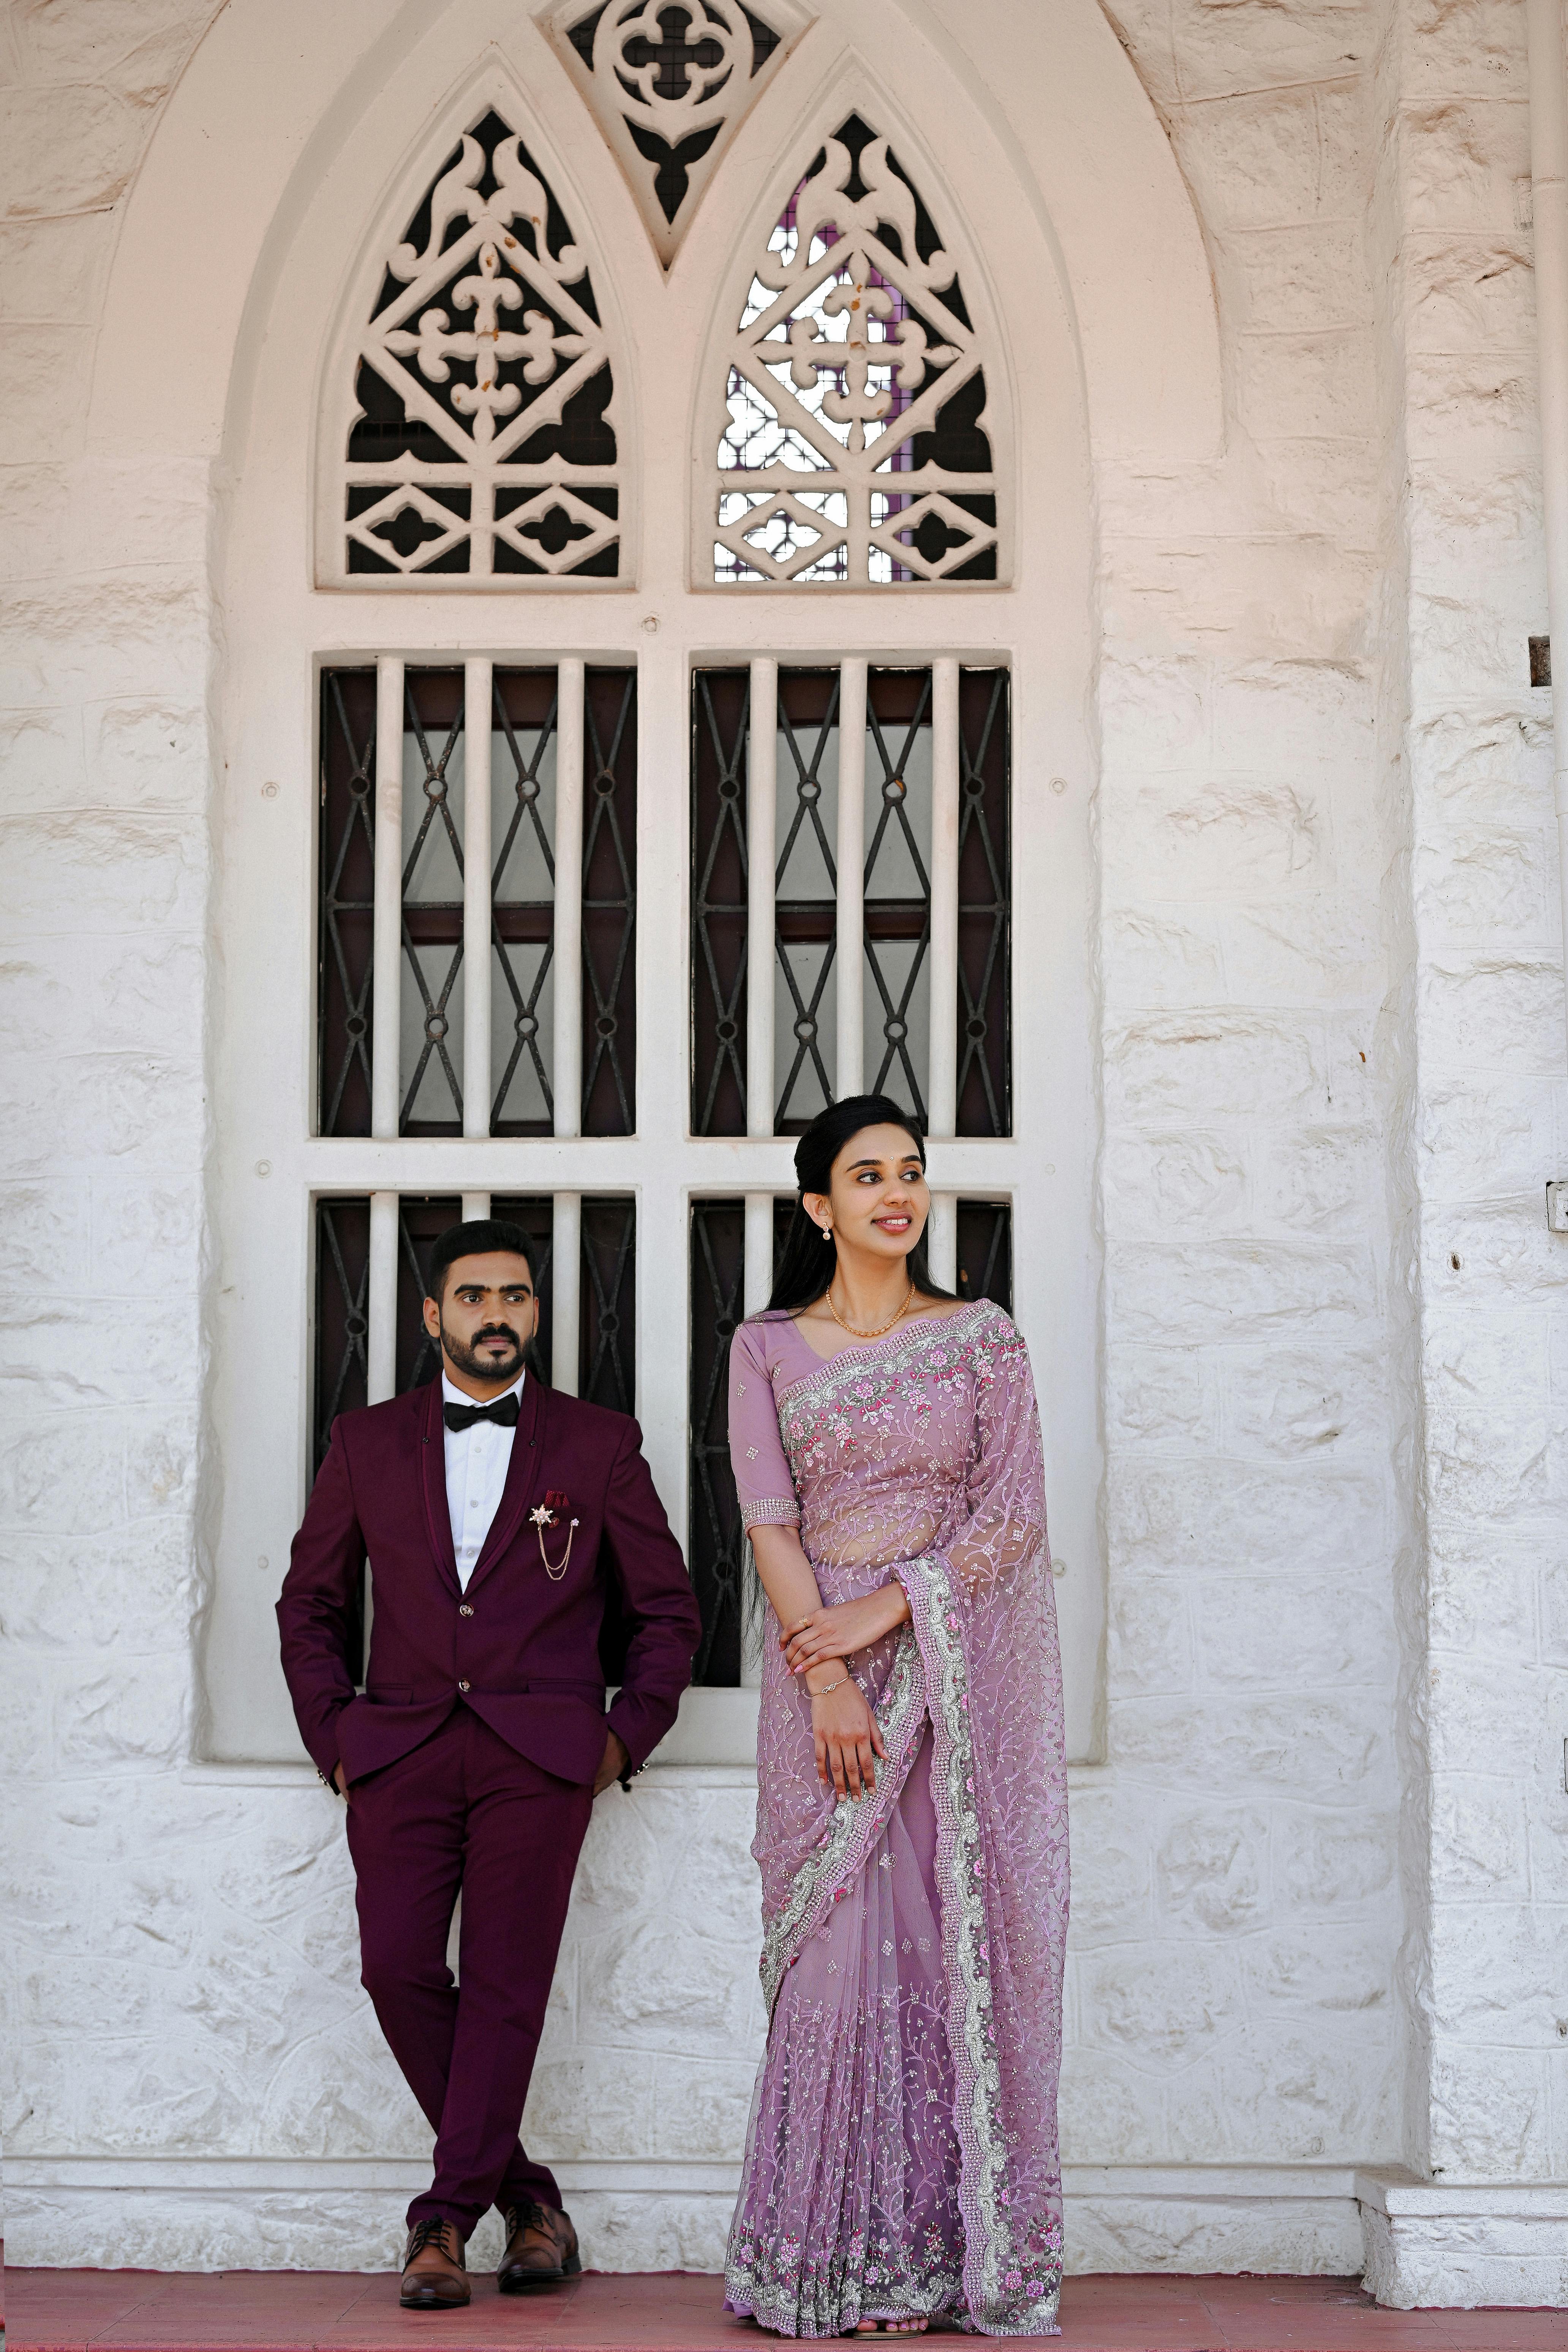 Adult Man and Woman Standing in Kerala Wedding Outfits · Free Stock Photo